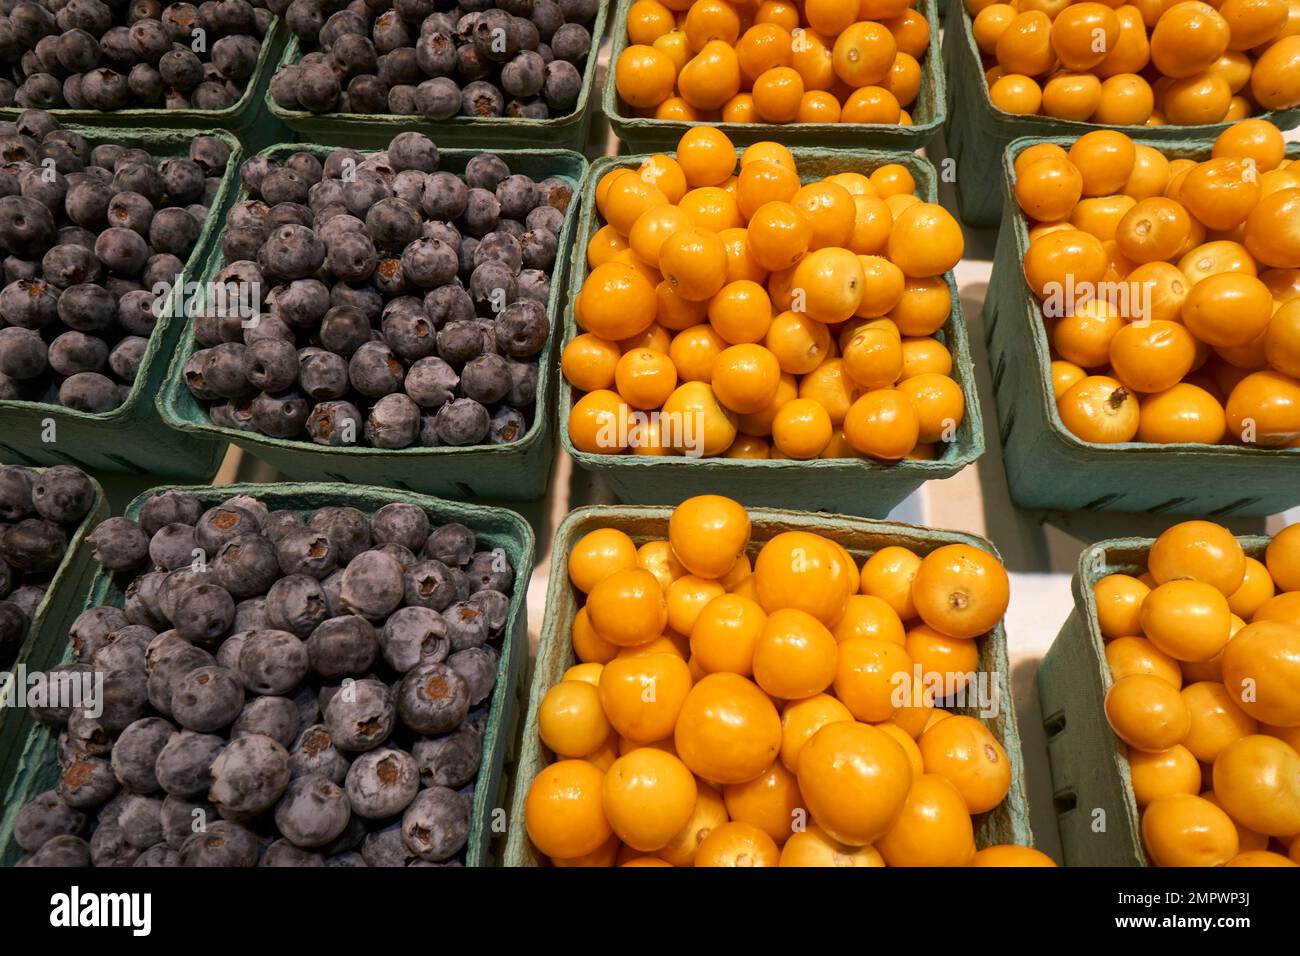 Containers of golden berries and blueberries for sale in the Granville Island Public Market, Vancouver, BC, Canada Stock Photo